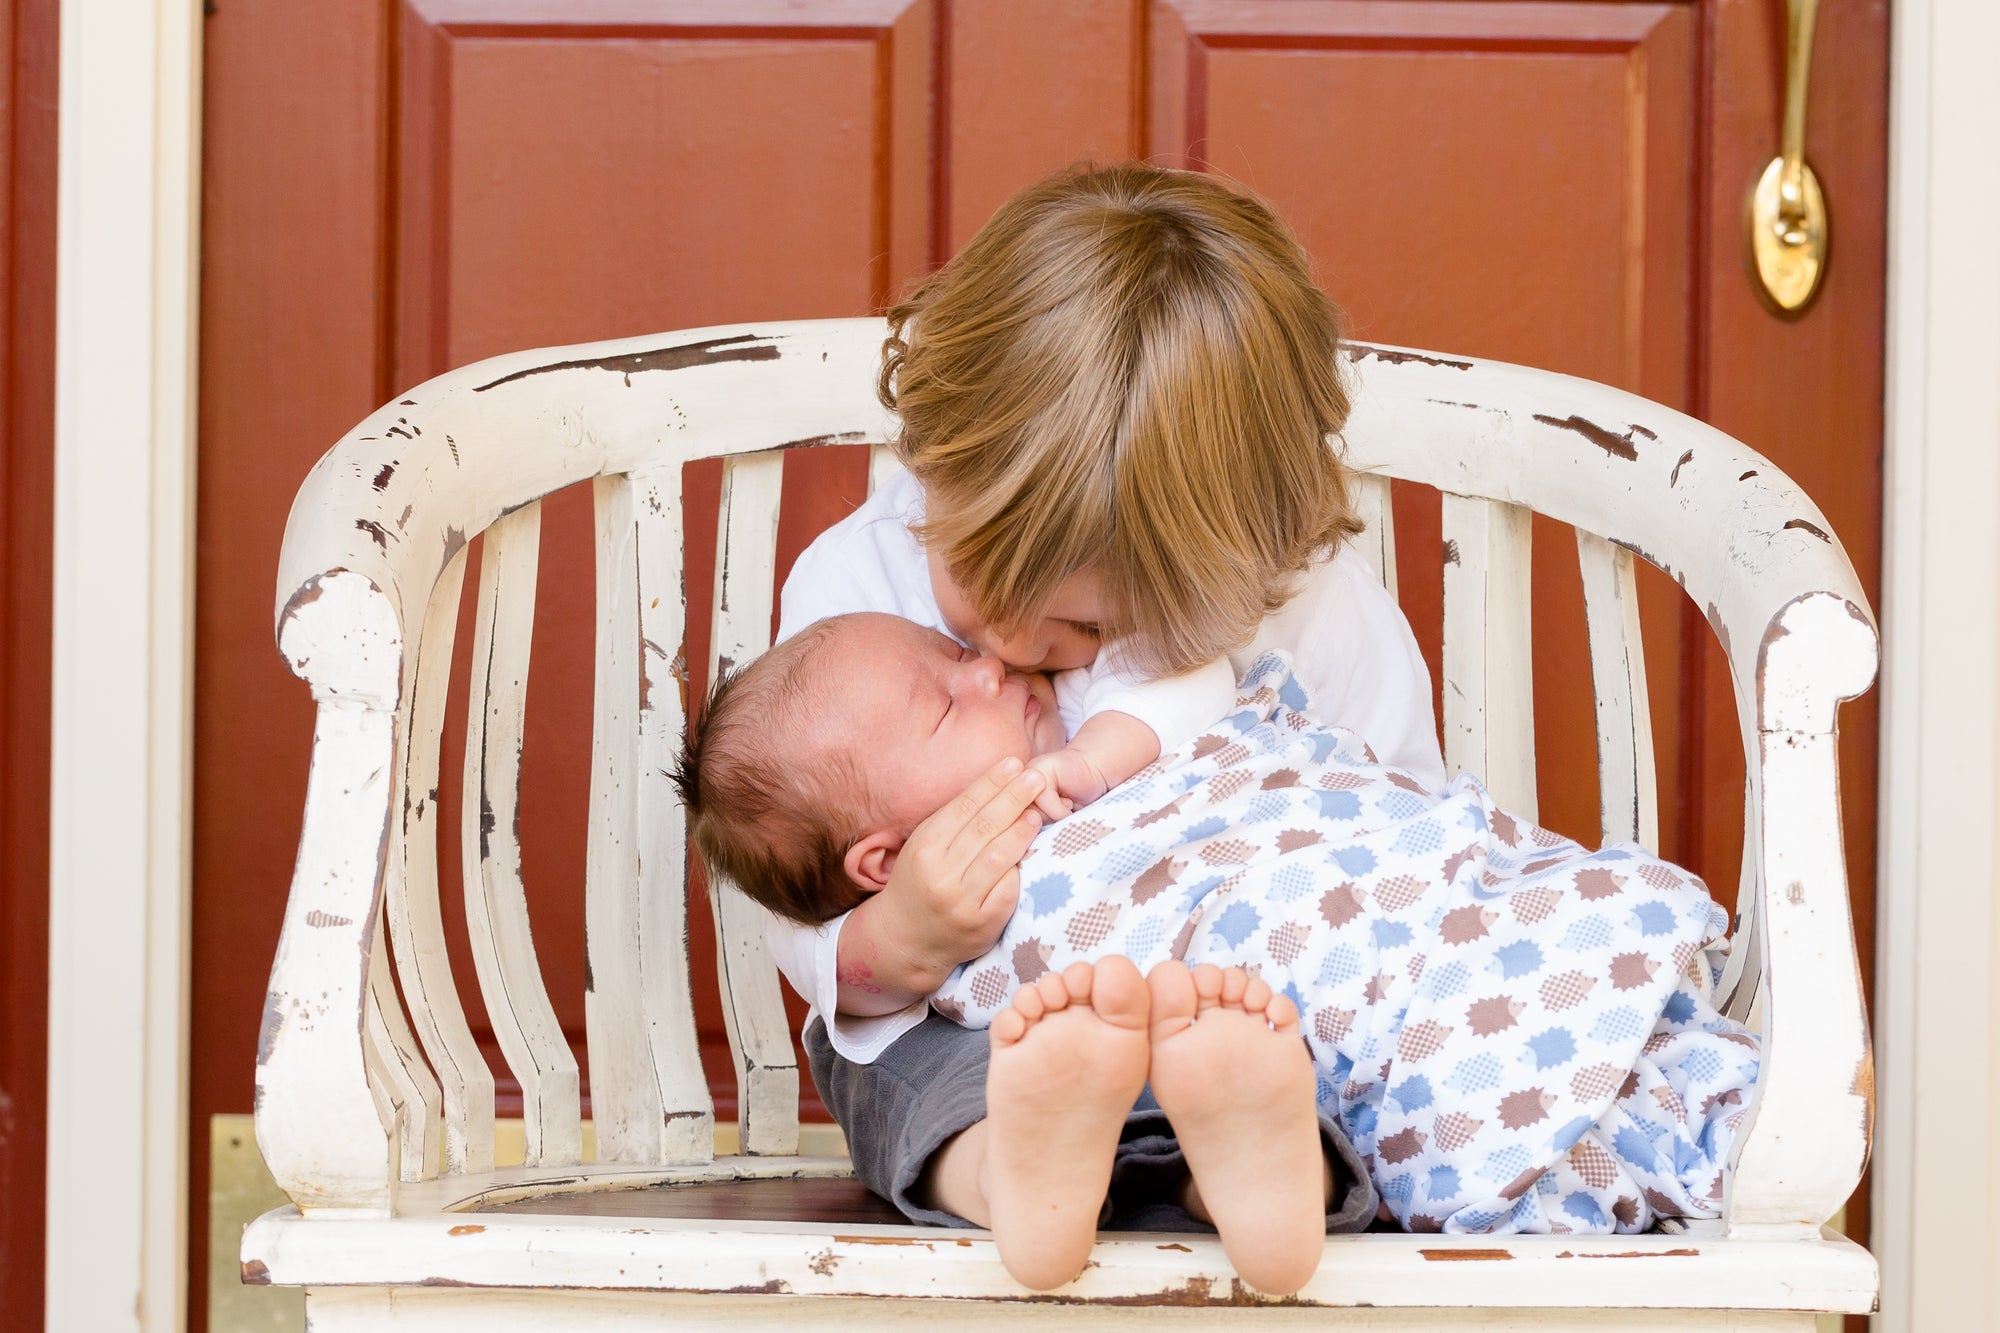 12 Tips for Preparing a Toddler for a New Baby